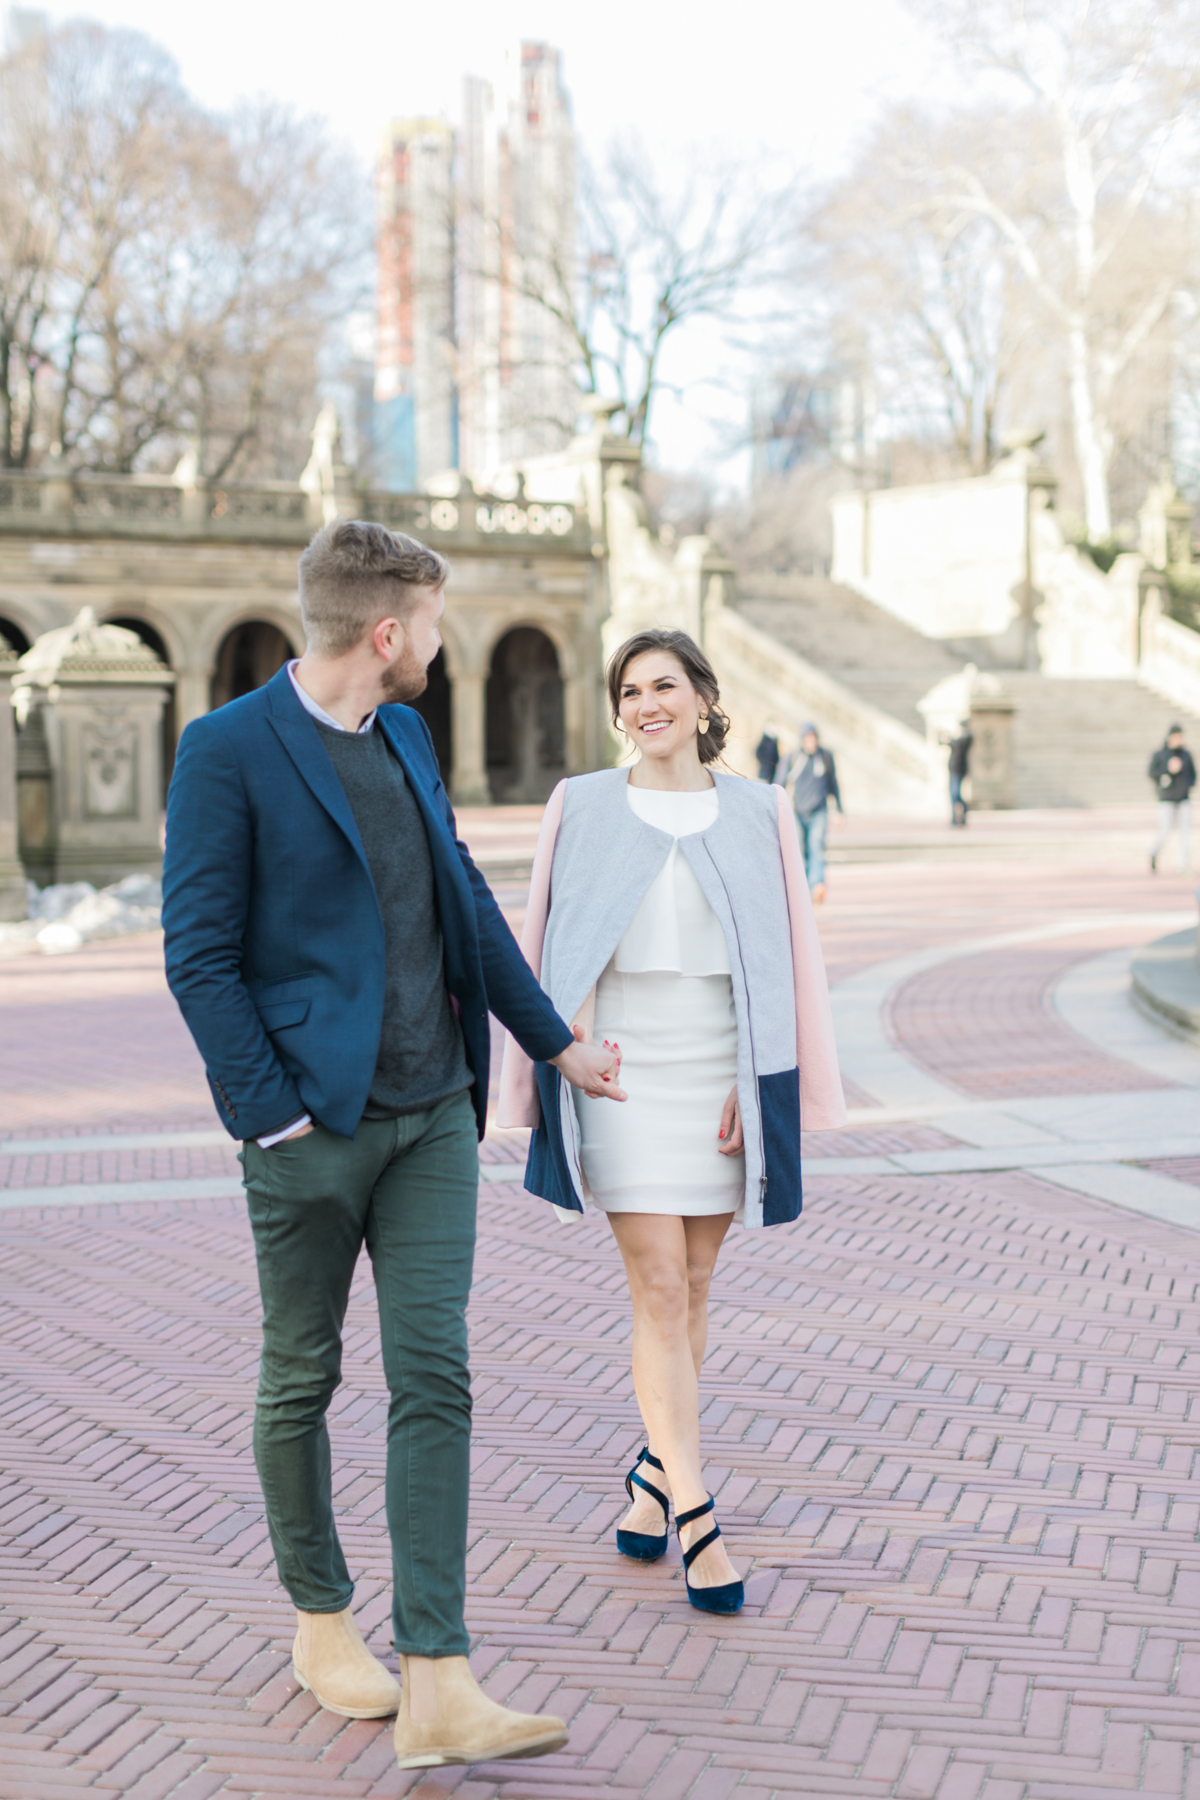 New York City Film Photographer | Central Park Engagement Session | Bethesda Fountain Photos | Bethesda Terrace Engagement Session | Couple Walking in Central Park